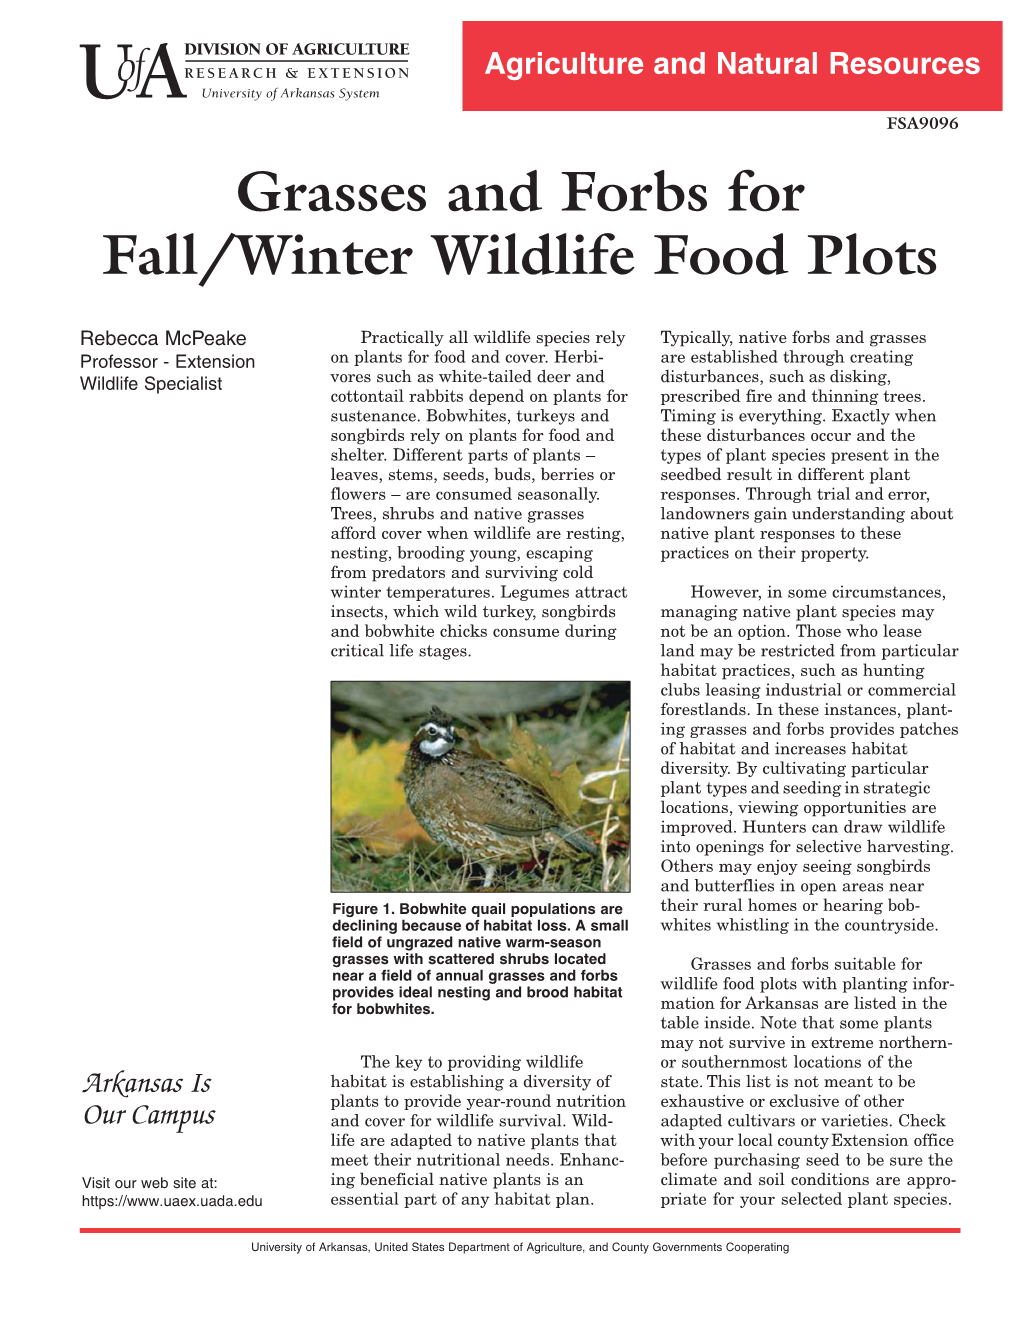 Grasses and Forbs for Wildlife